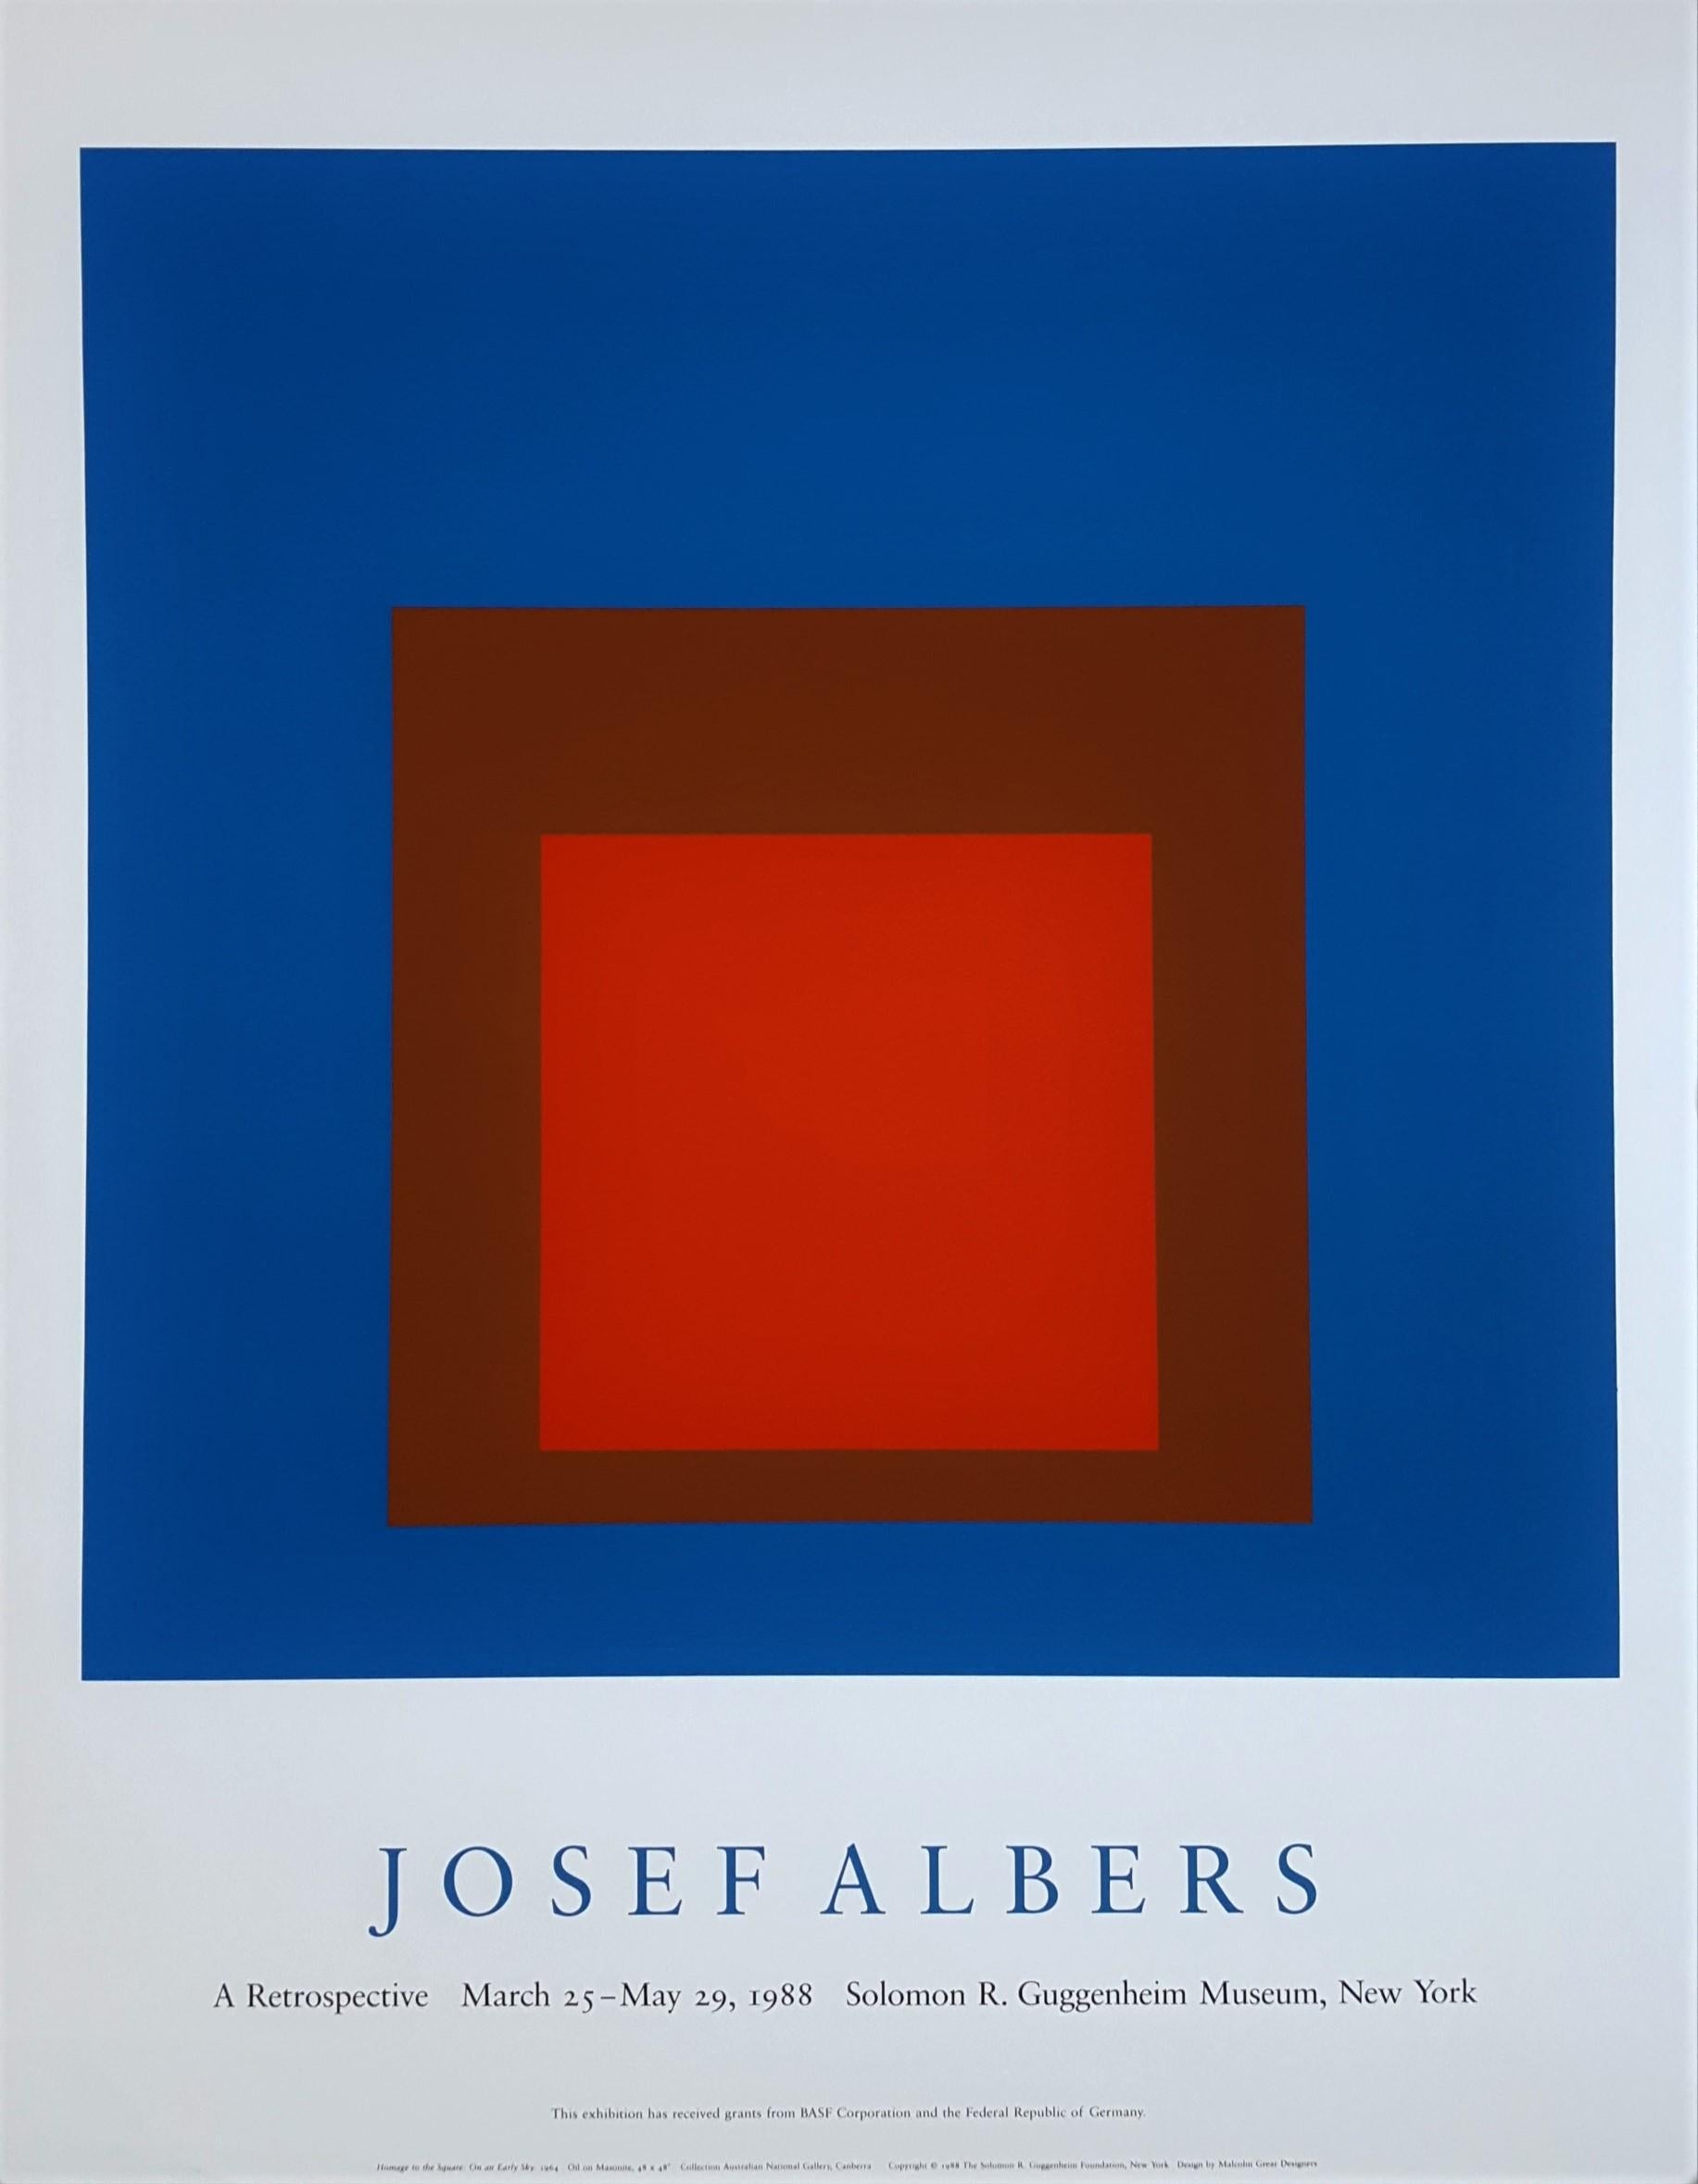 (after) Josef Albers Abstract Print - Josef Albers: A Retrospective